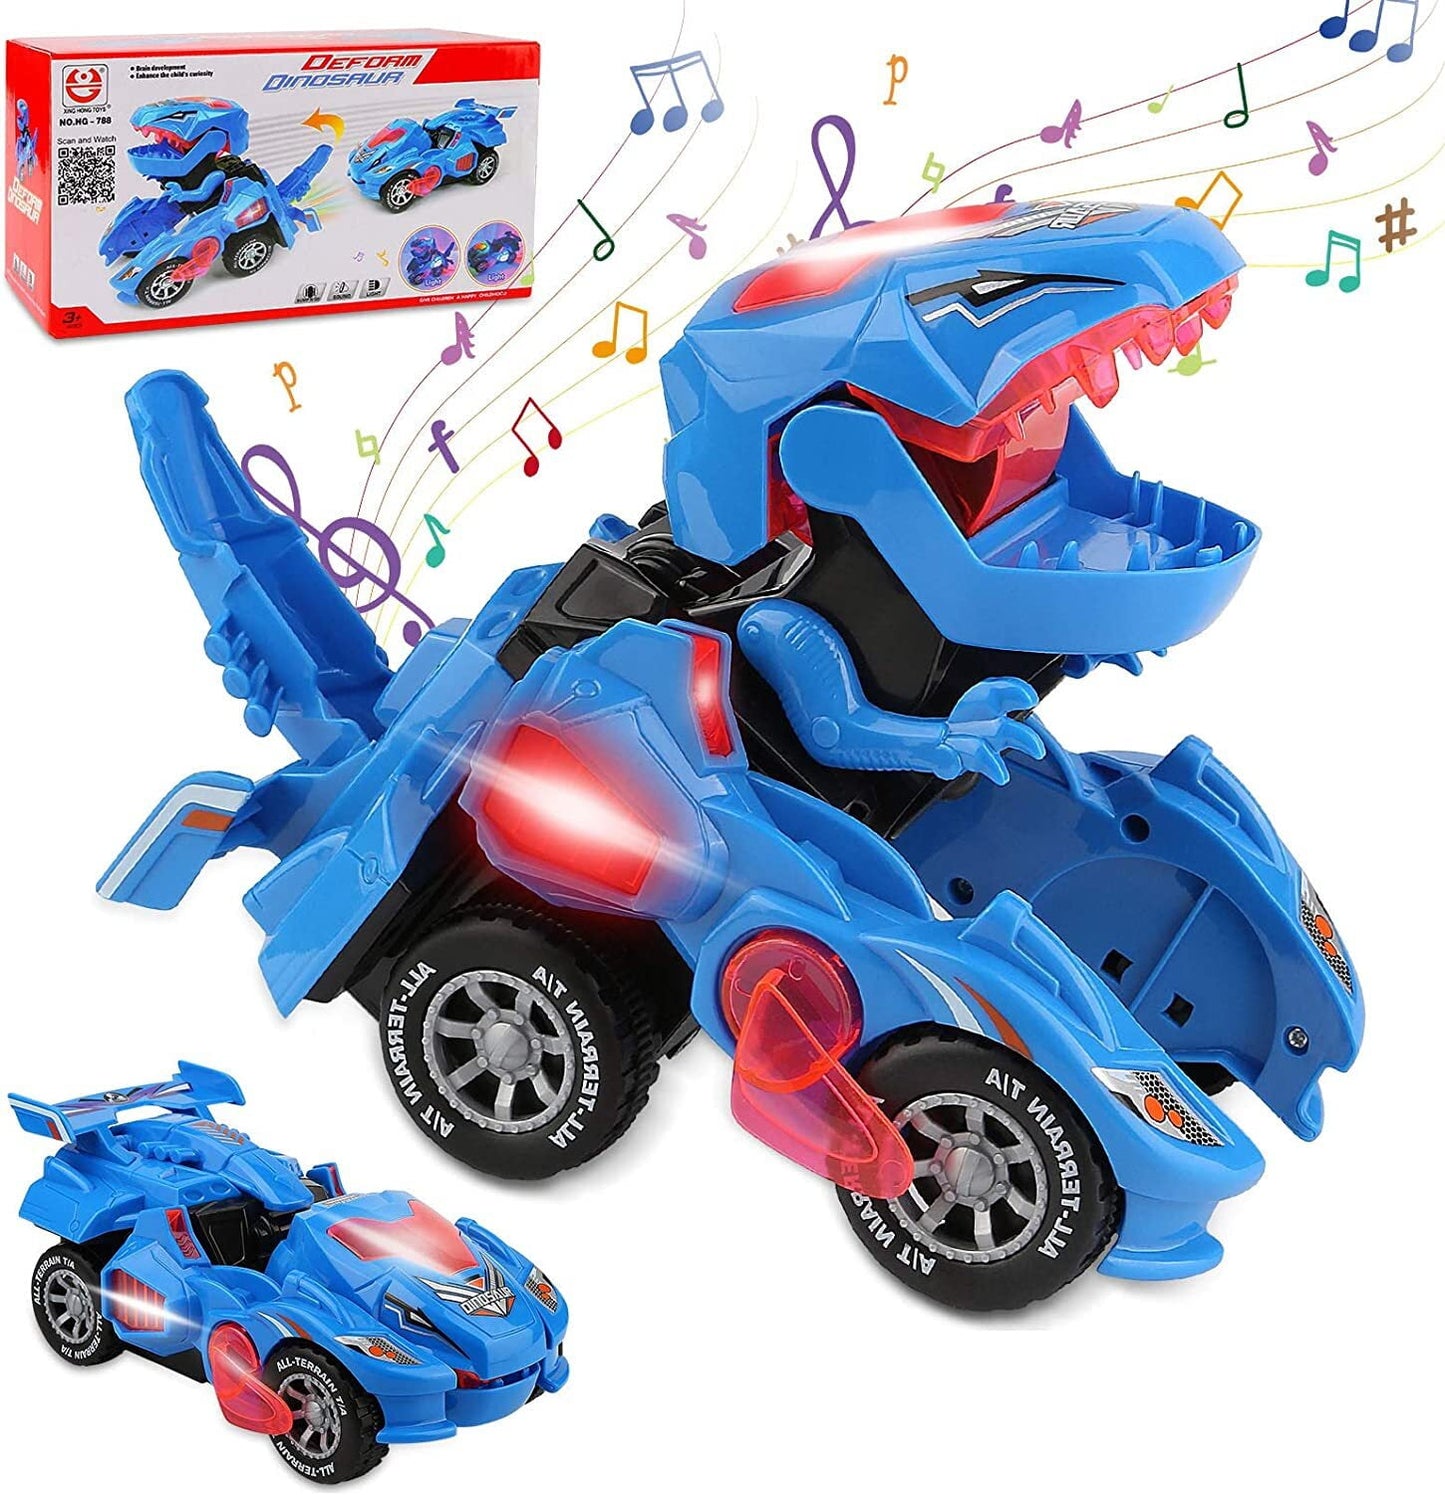 Transforming Dinosaur Car Toys,2 in 1 Automatic Dinosaur Transform Car Toy,Dinosaur Transformer Toy for Kids 3 Year Old and Up